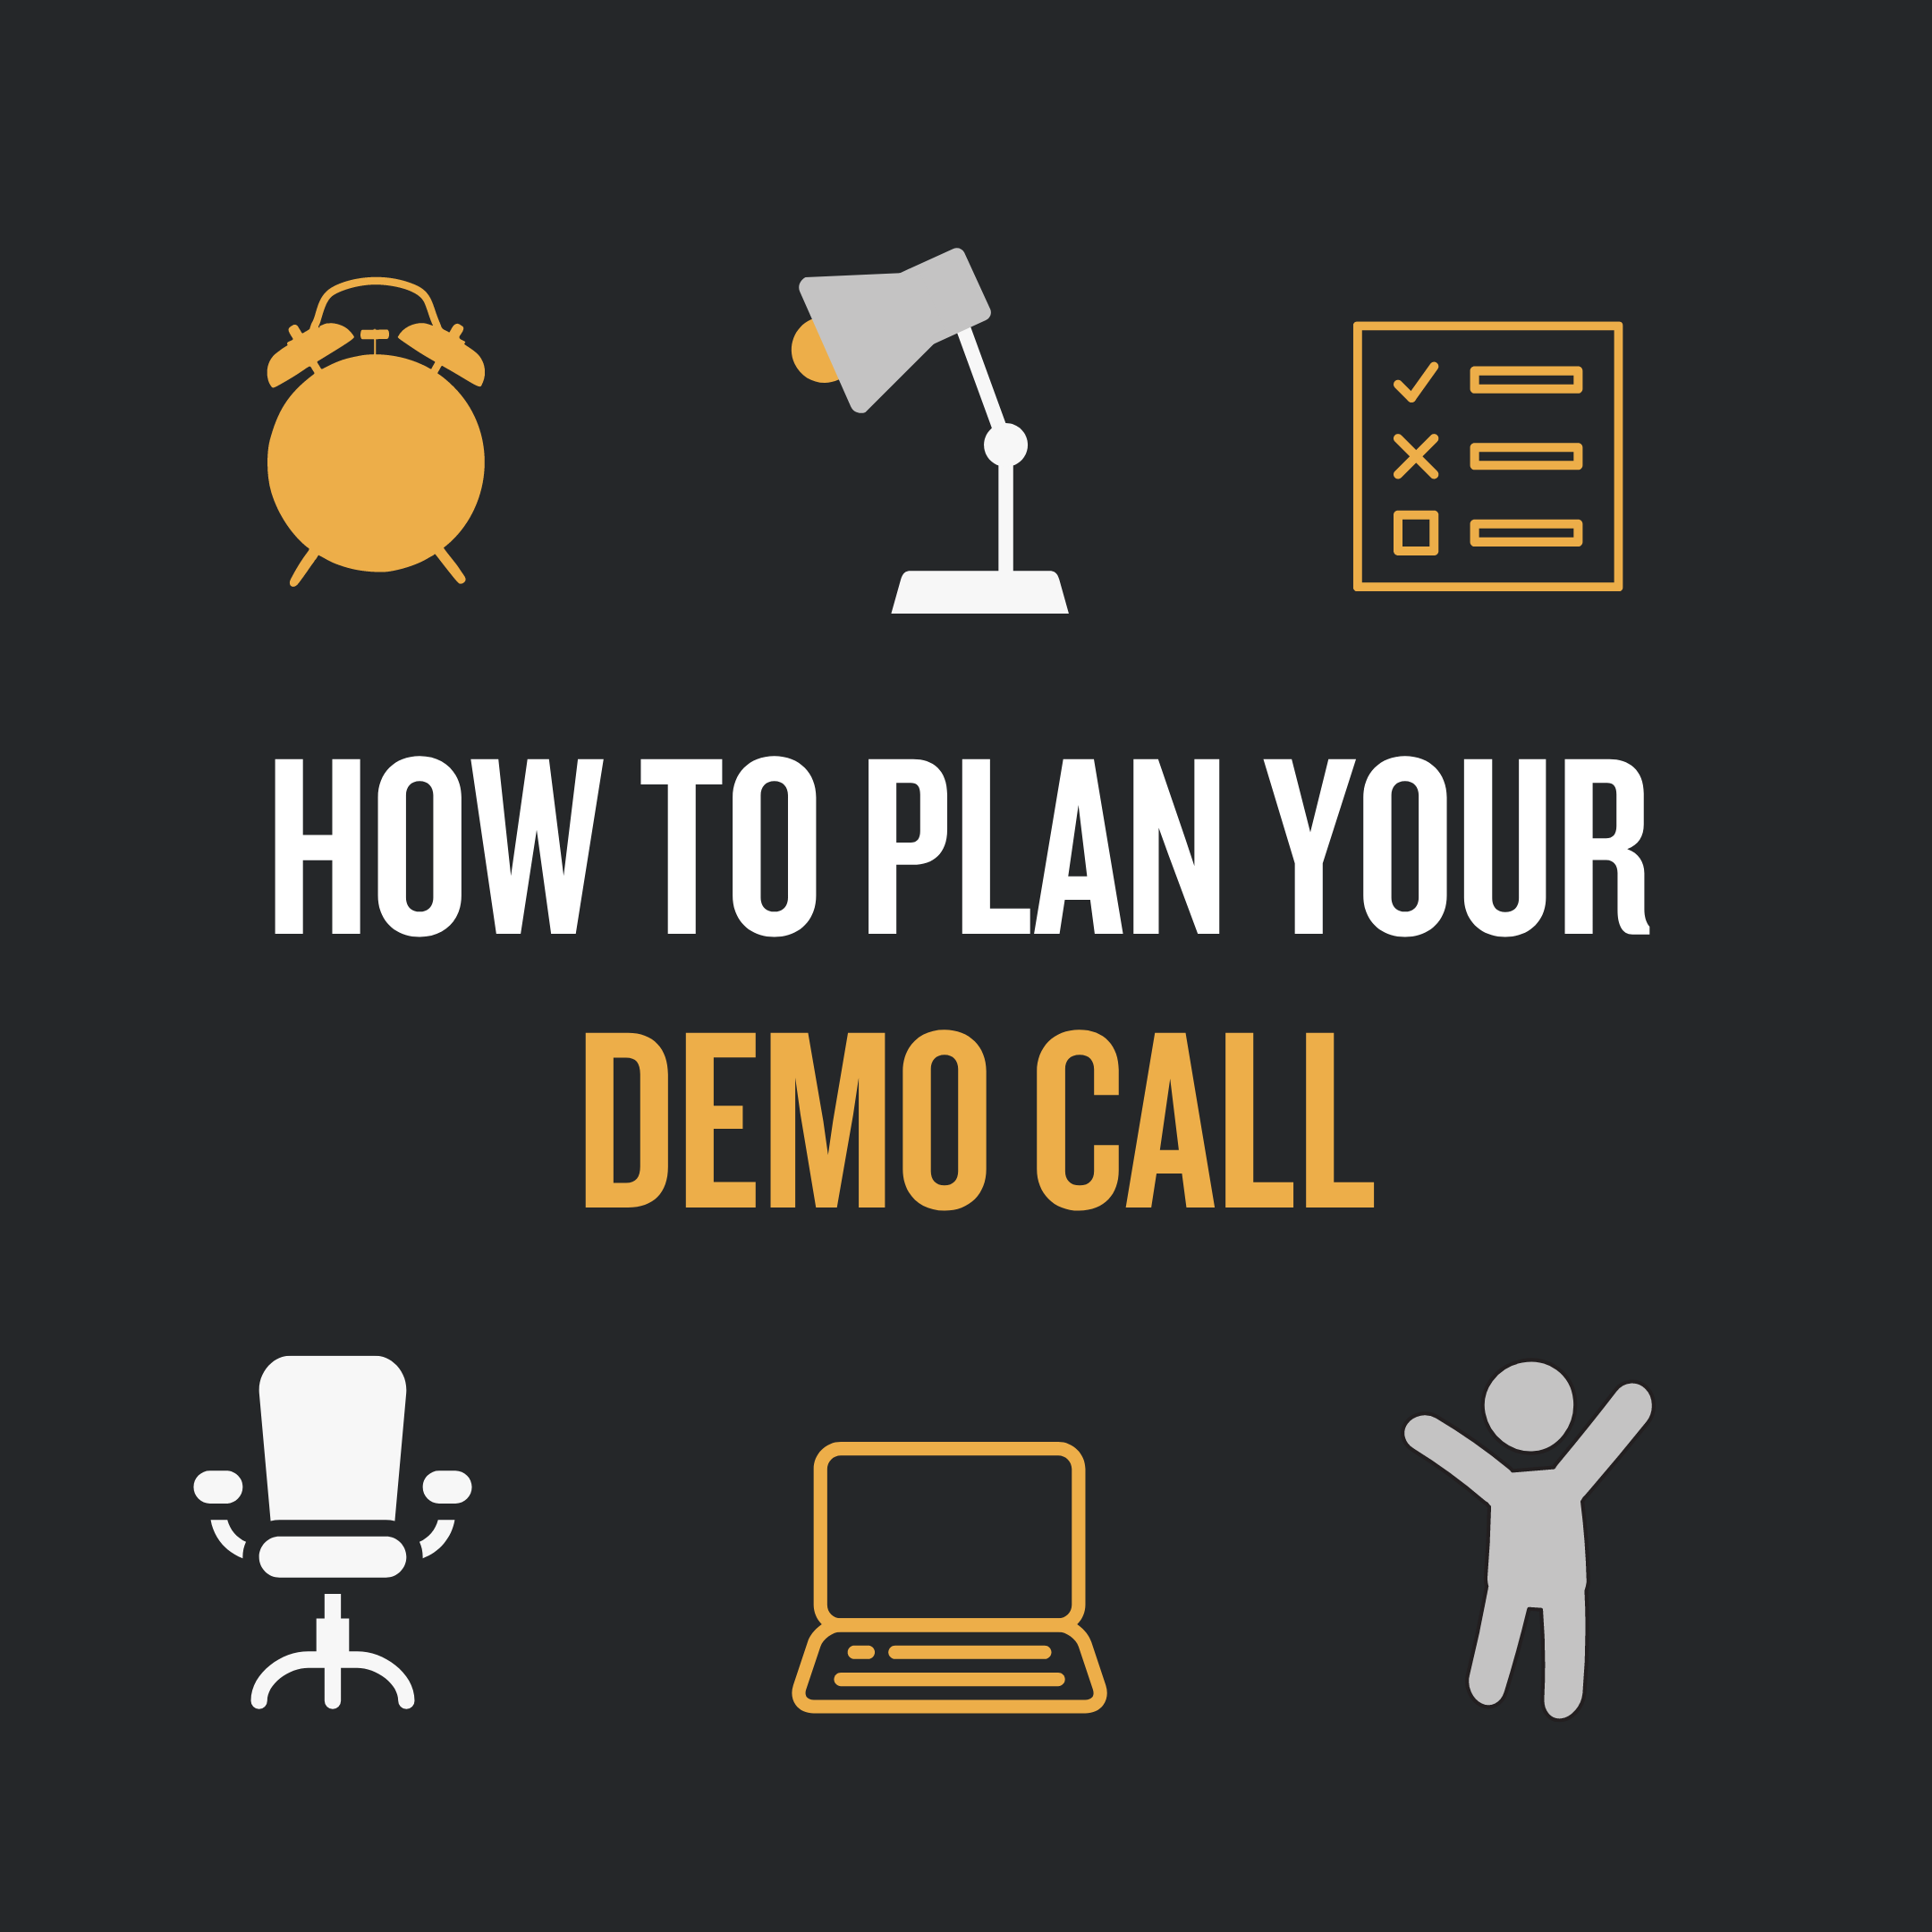 How To Plan Your Demo Call